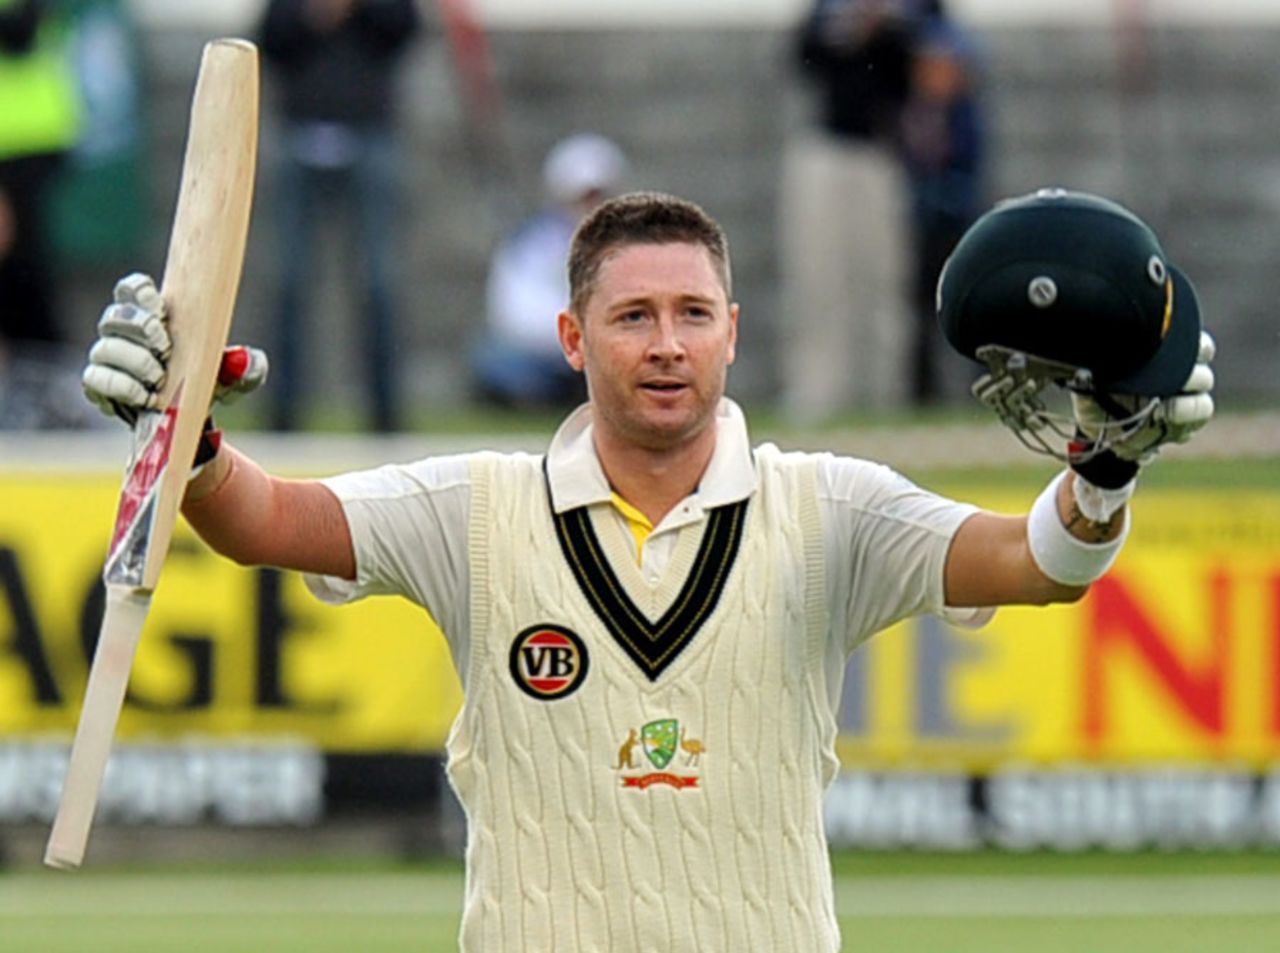 Michael Clarke completed his 16th Test century, South Africa v Australia, 1st Test, Cape Town, 1st day, November 9, 2011